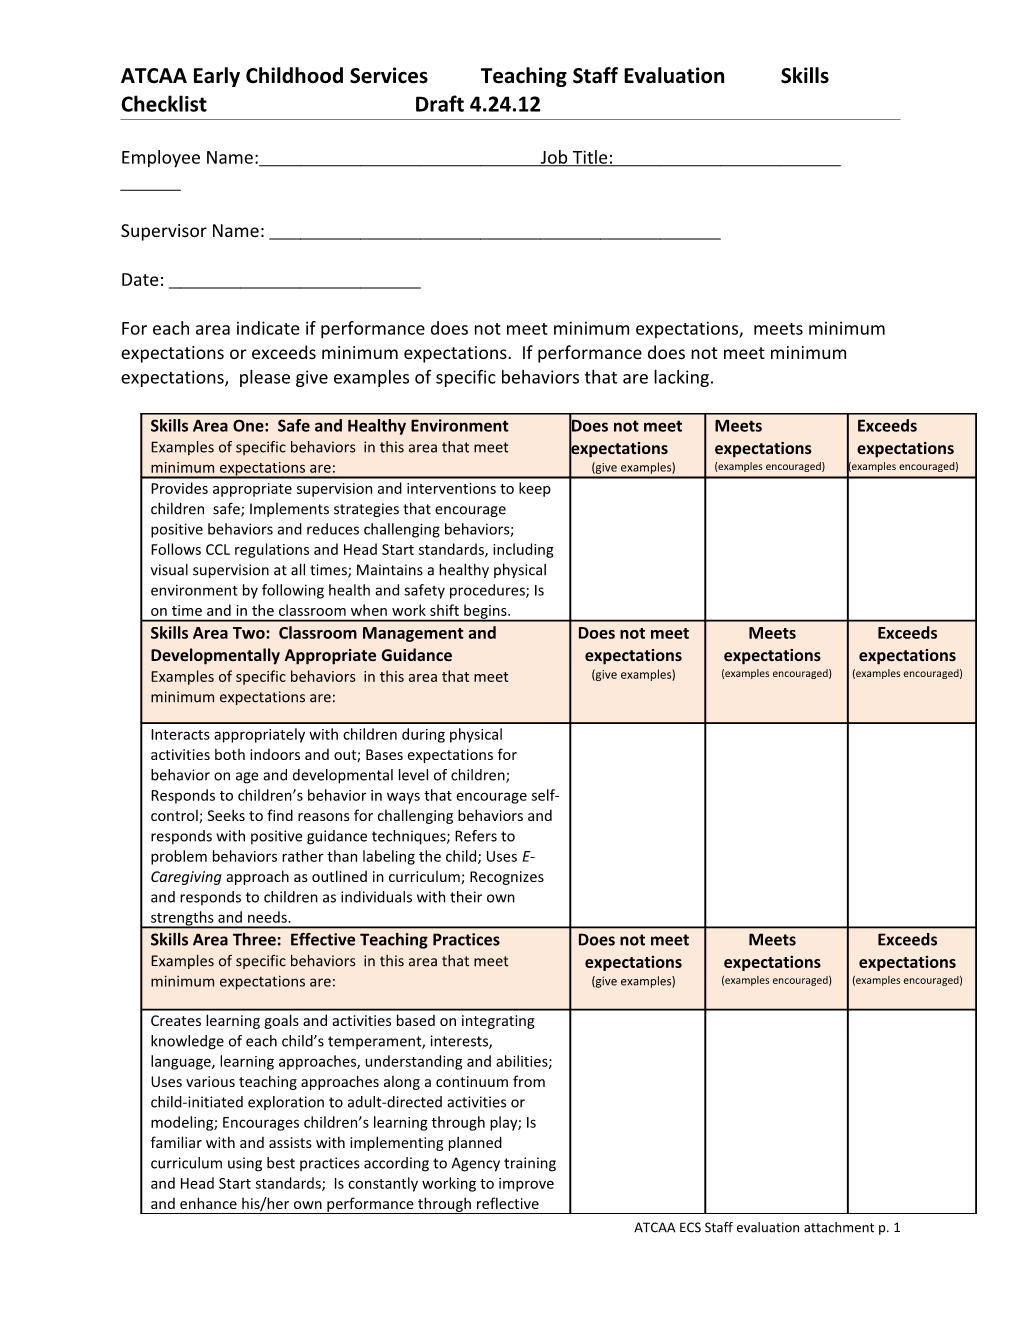 ATCAA Early Childhood Services Staff Evaluation Draft Skills Checklist